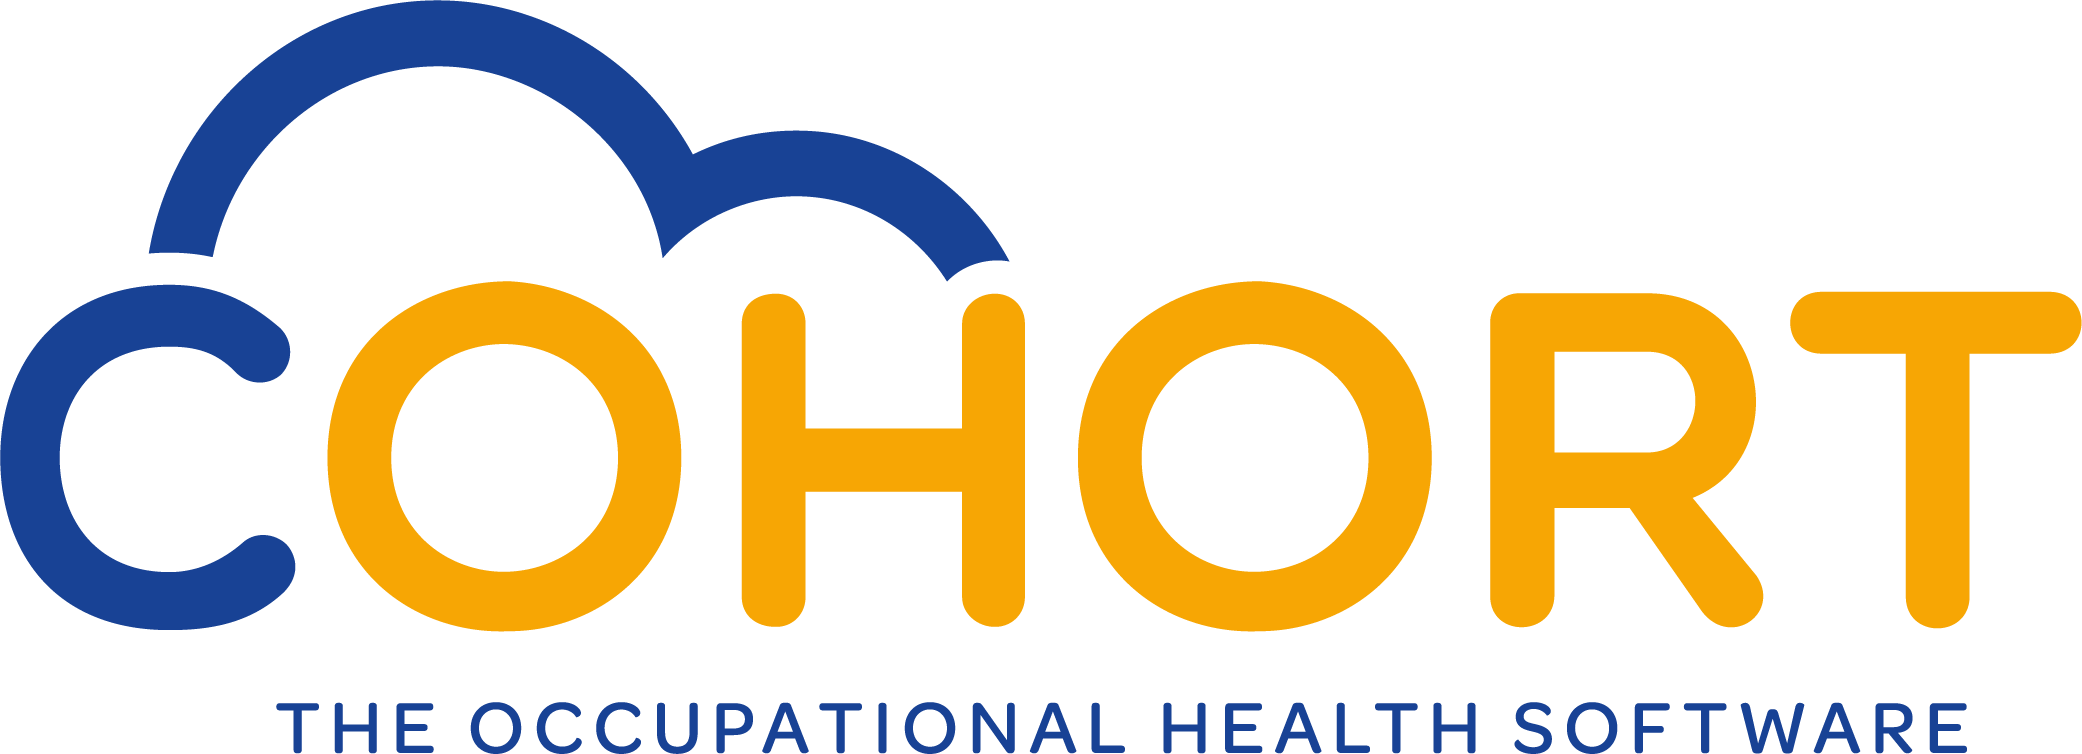 Yellow Software Logo - The Leading Occupational Health Software Solution | Cohort